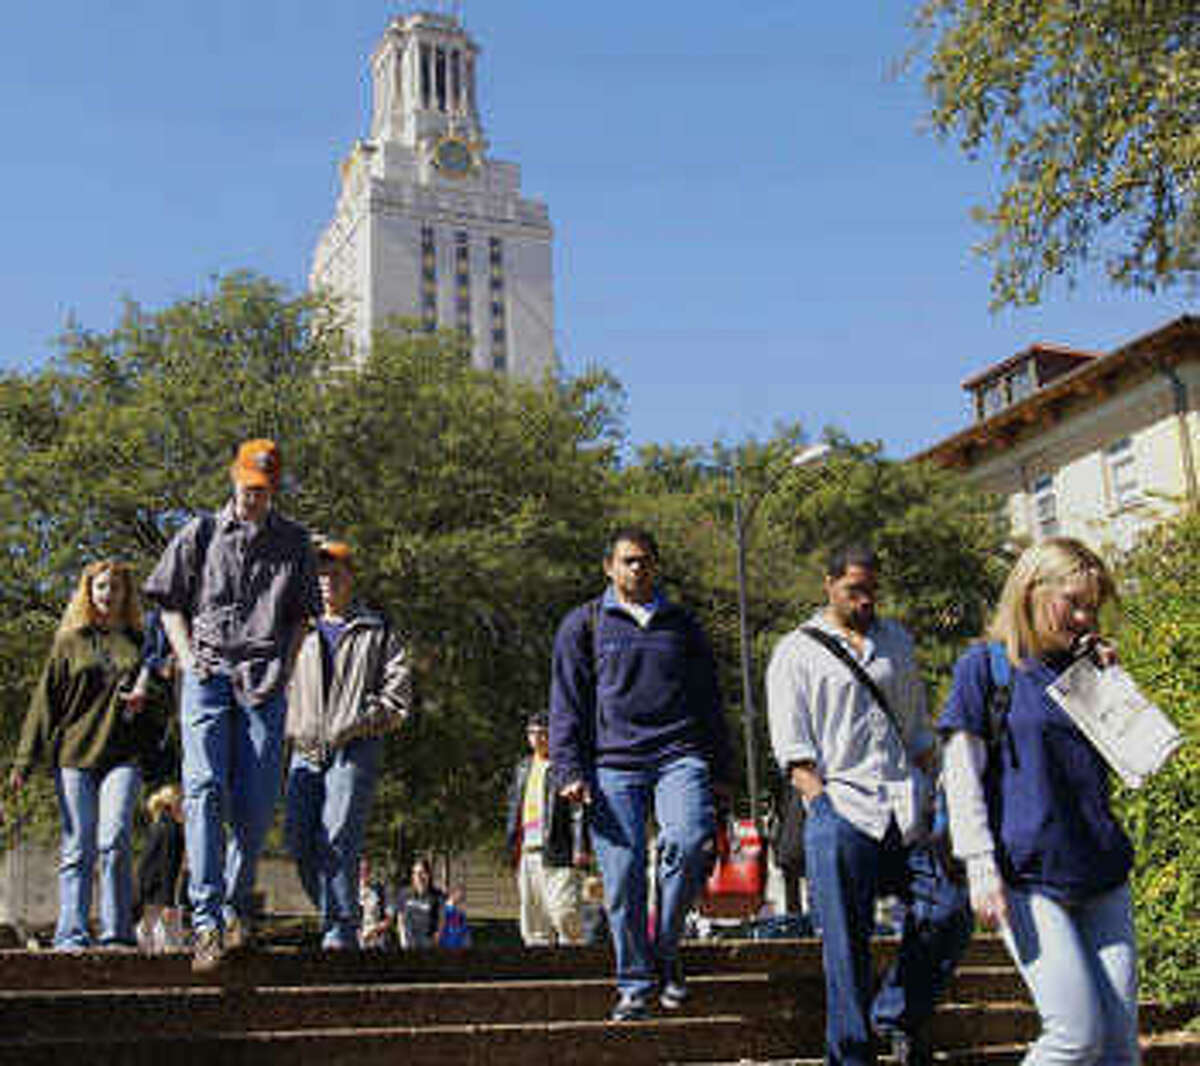 Students head to classes at UT-Austin.